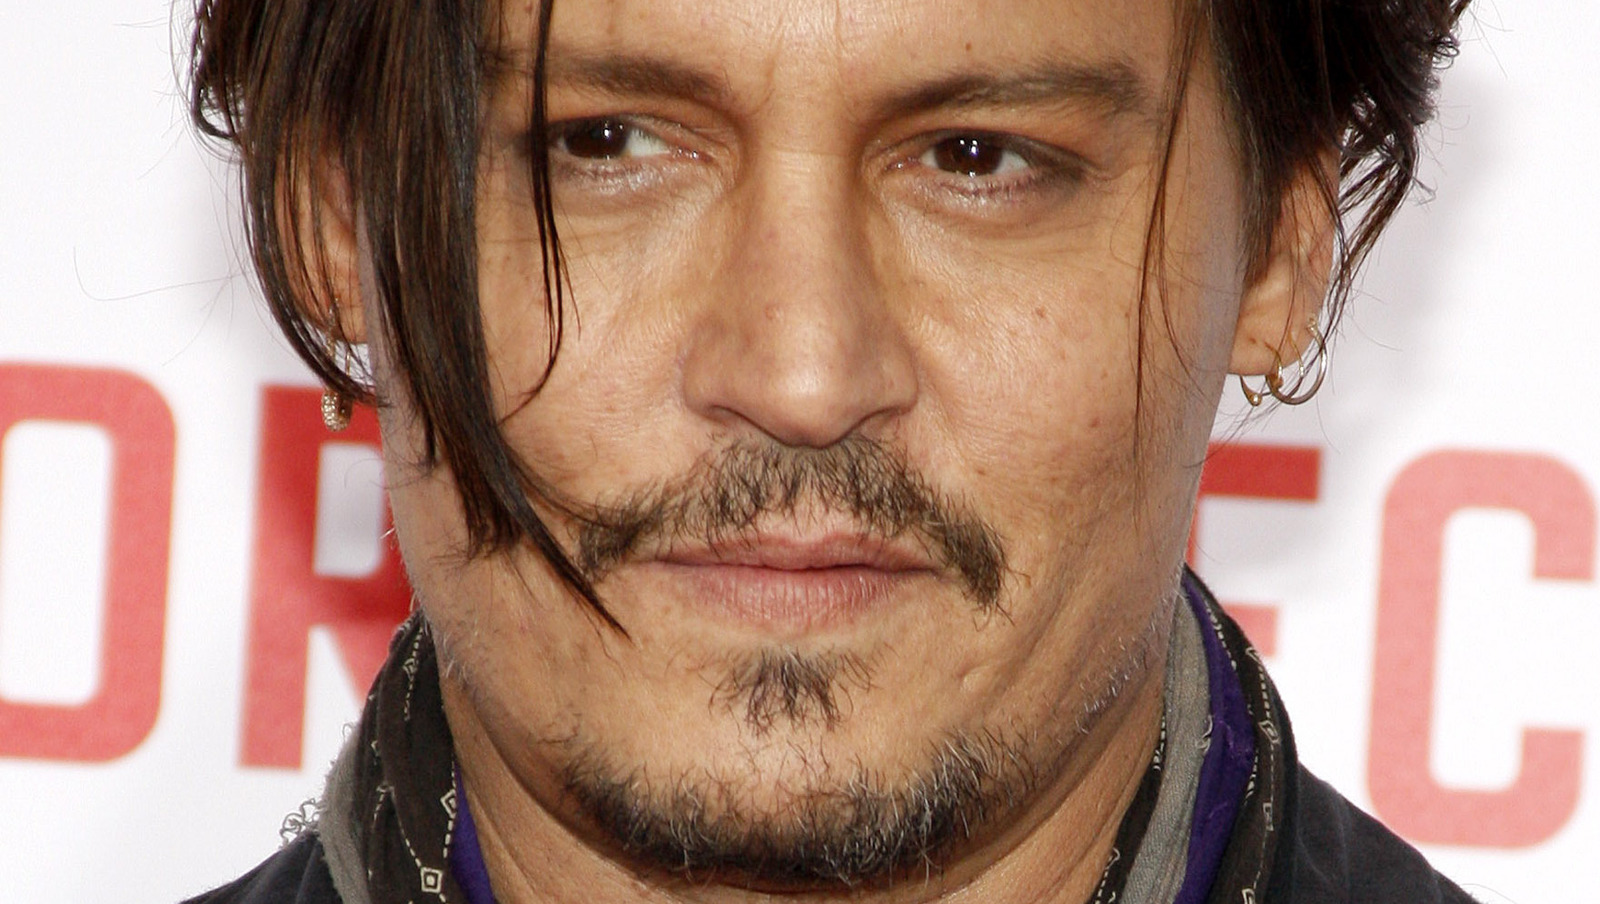 Johnny Depp is putting another legal issue to bed